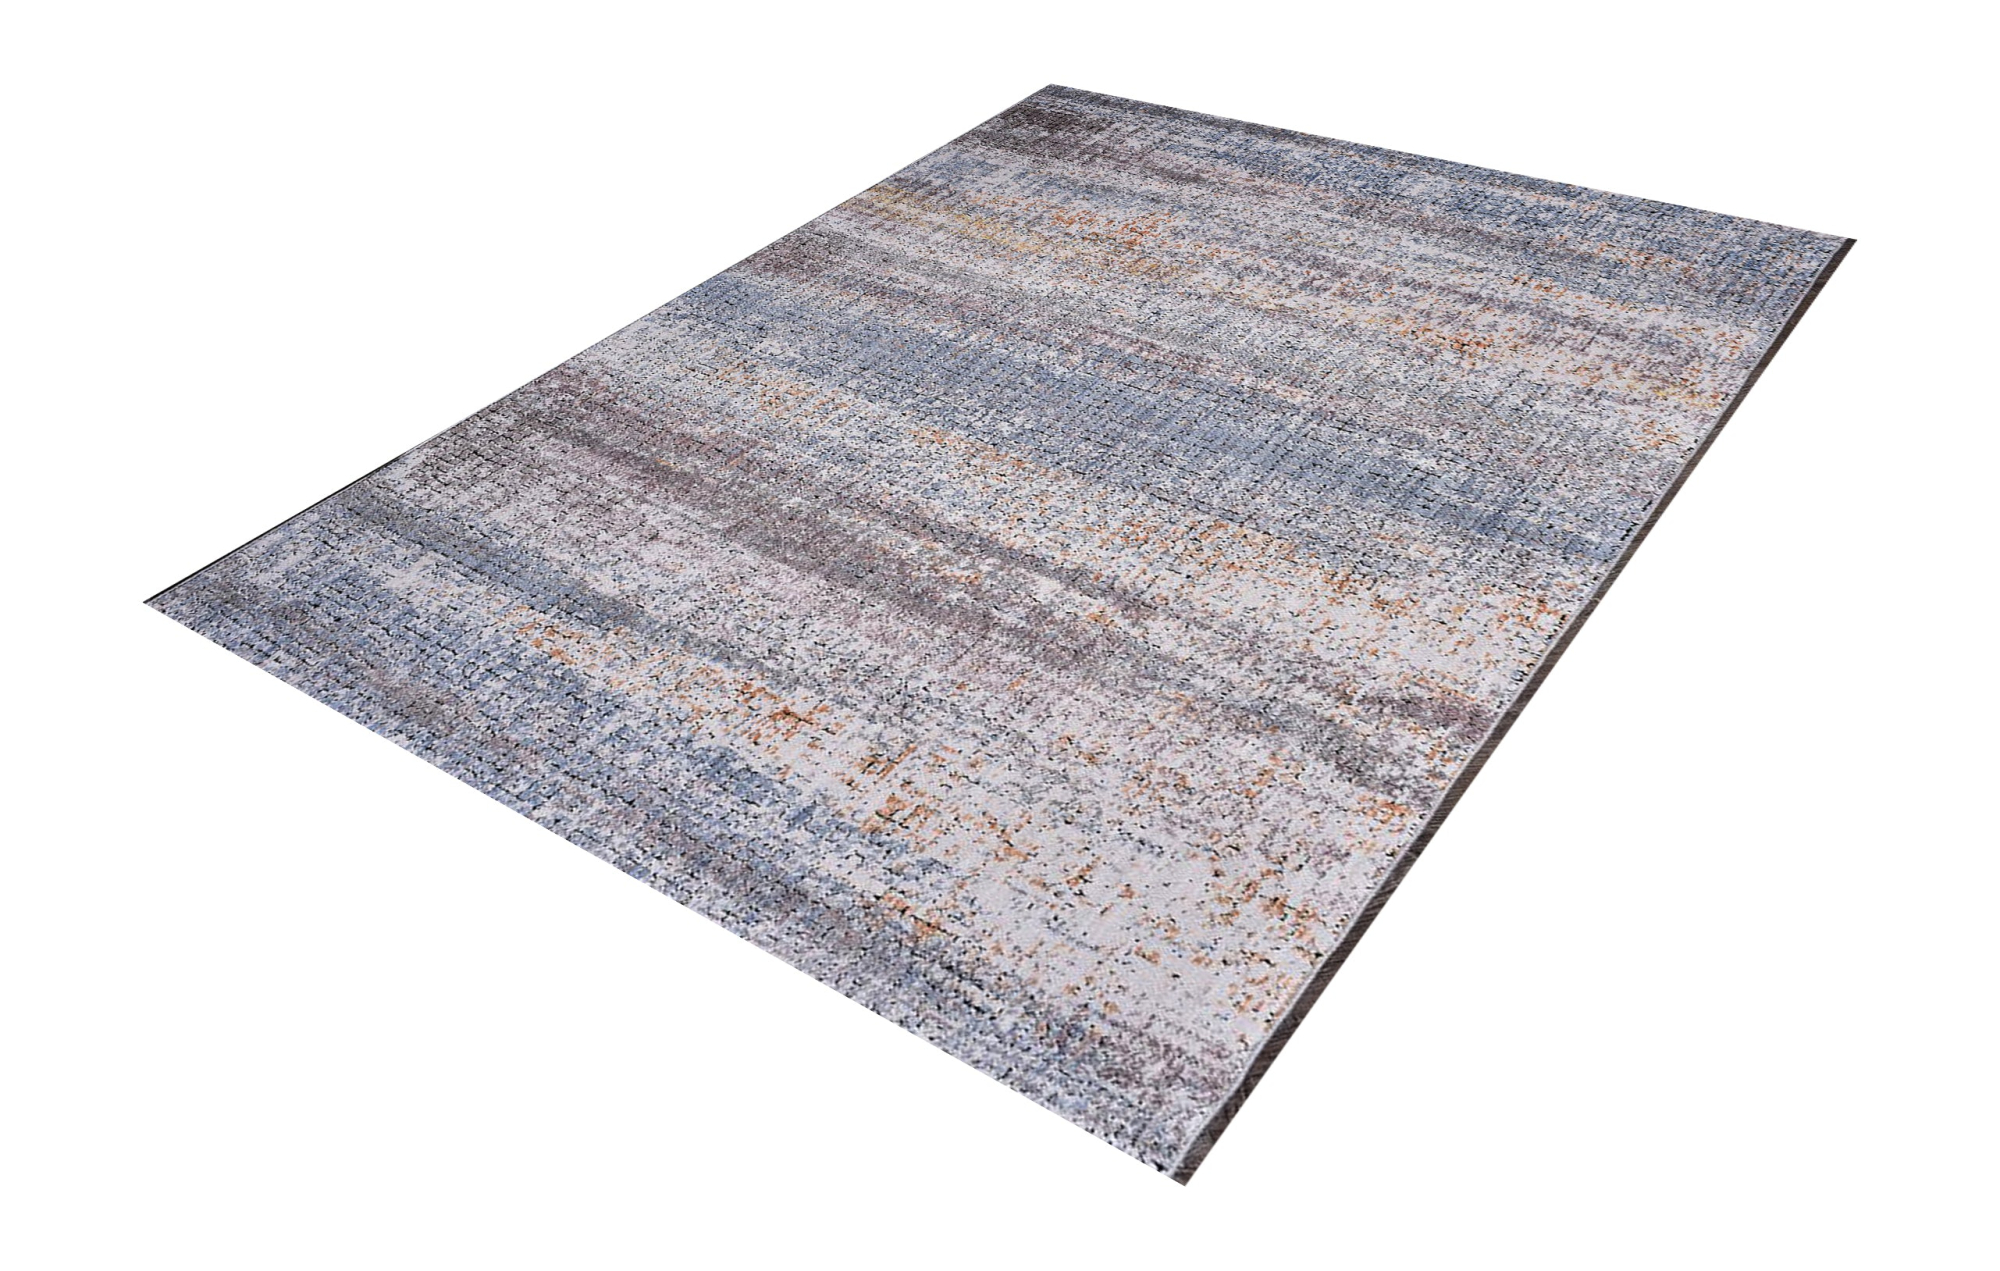 Intrigue Denin Woven Rug-Area rug for living room, dining area, and bedroom